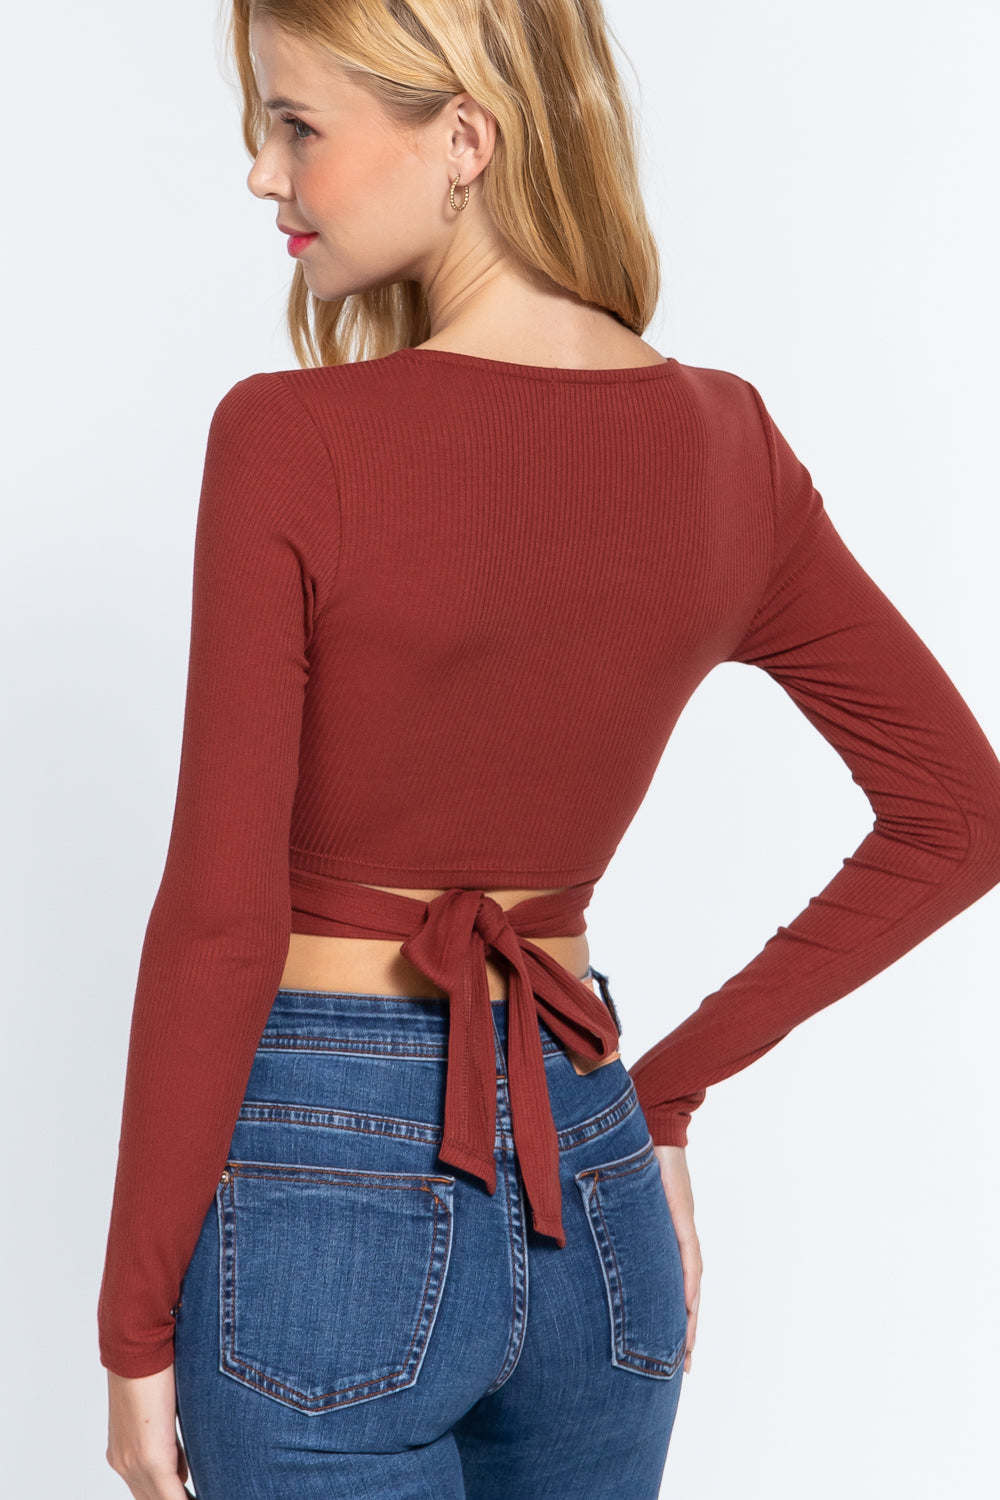 Stylish Classic Long Sleeved Halter - Red